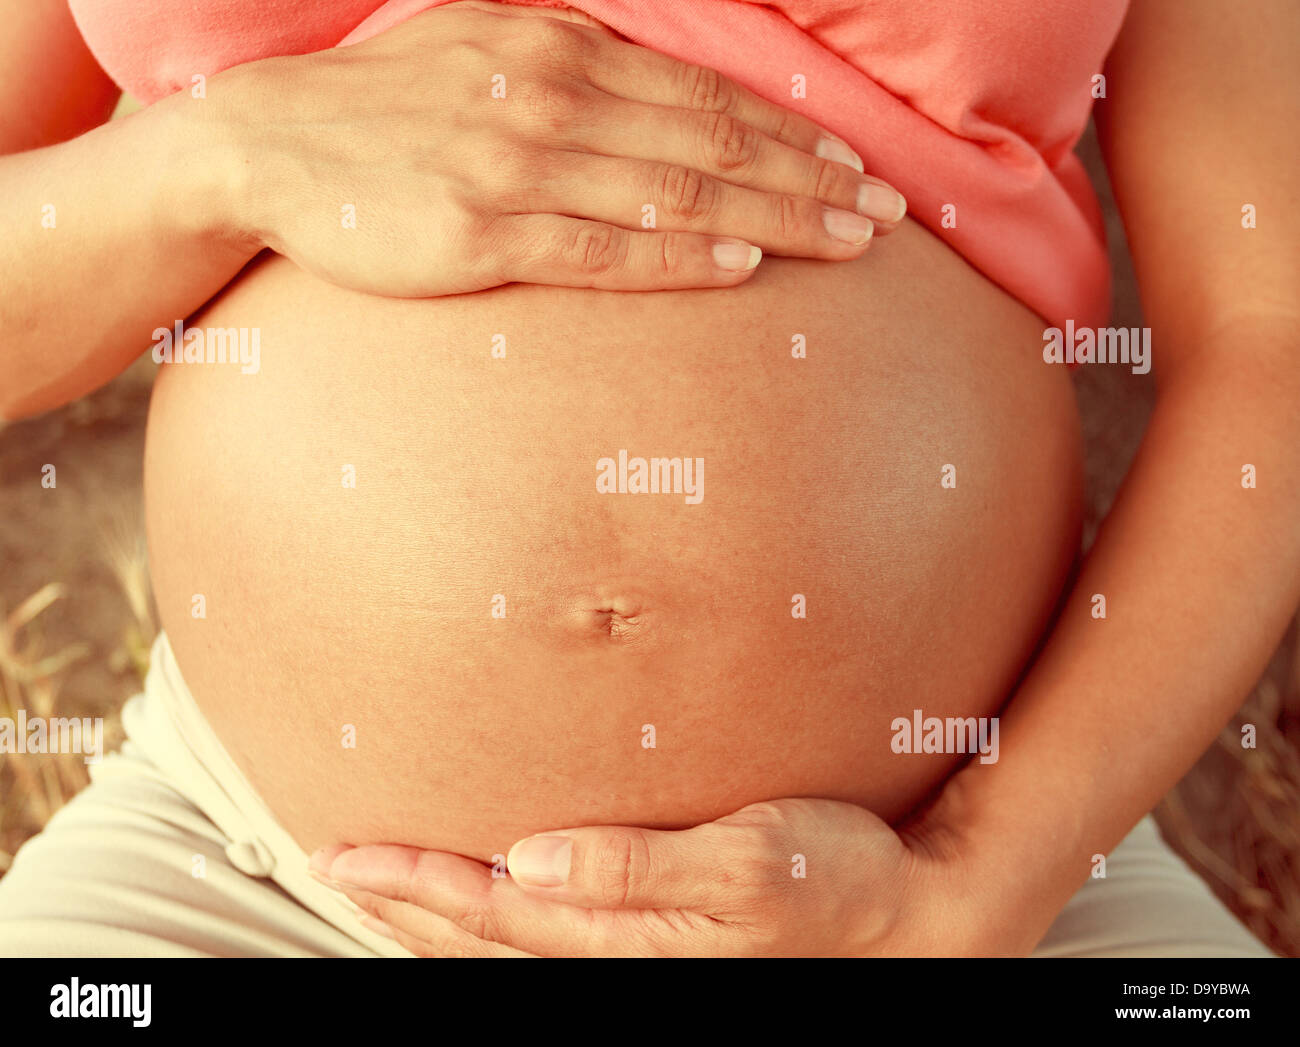 Pregnant woman touching her belly with hands Stock Photo